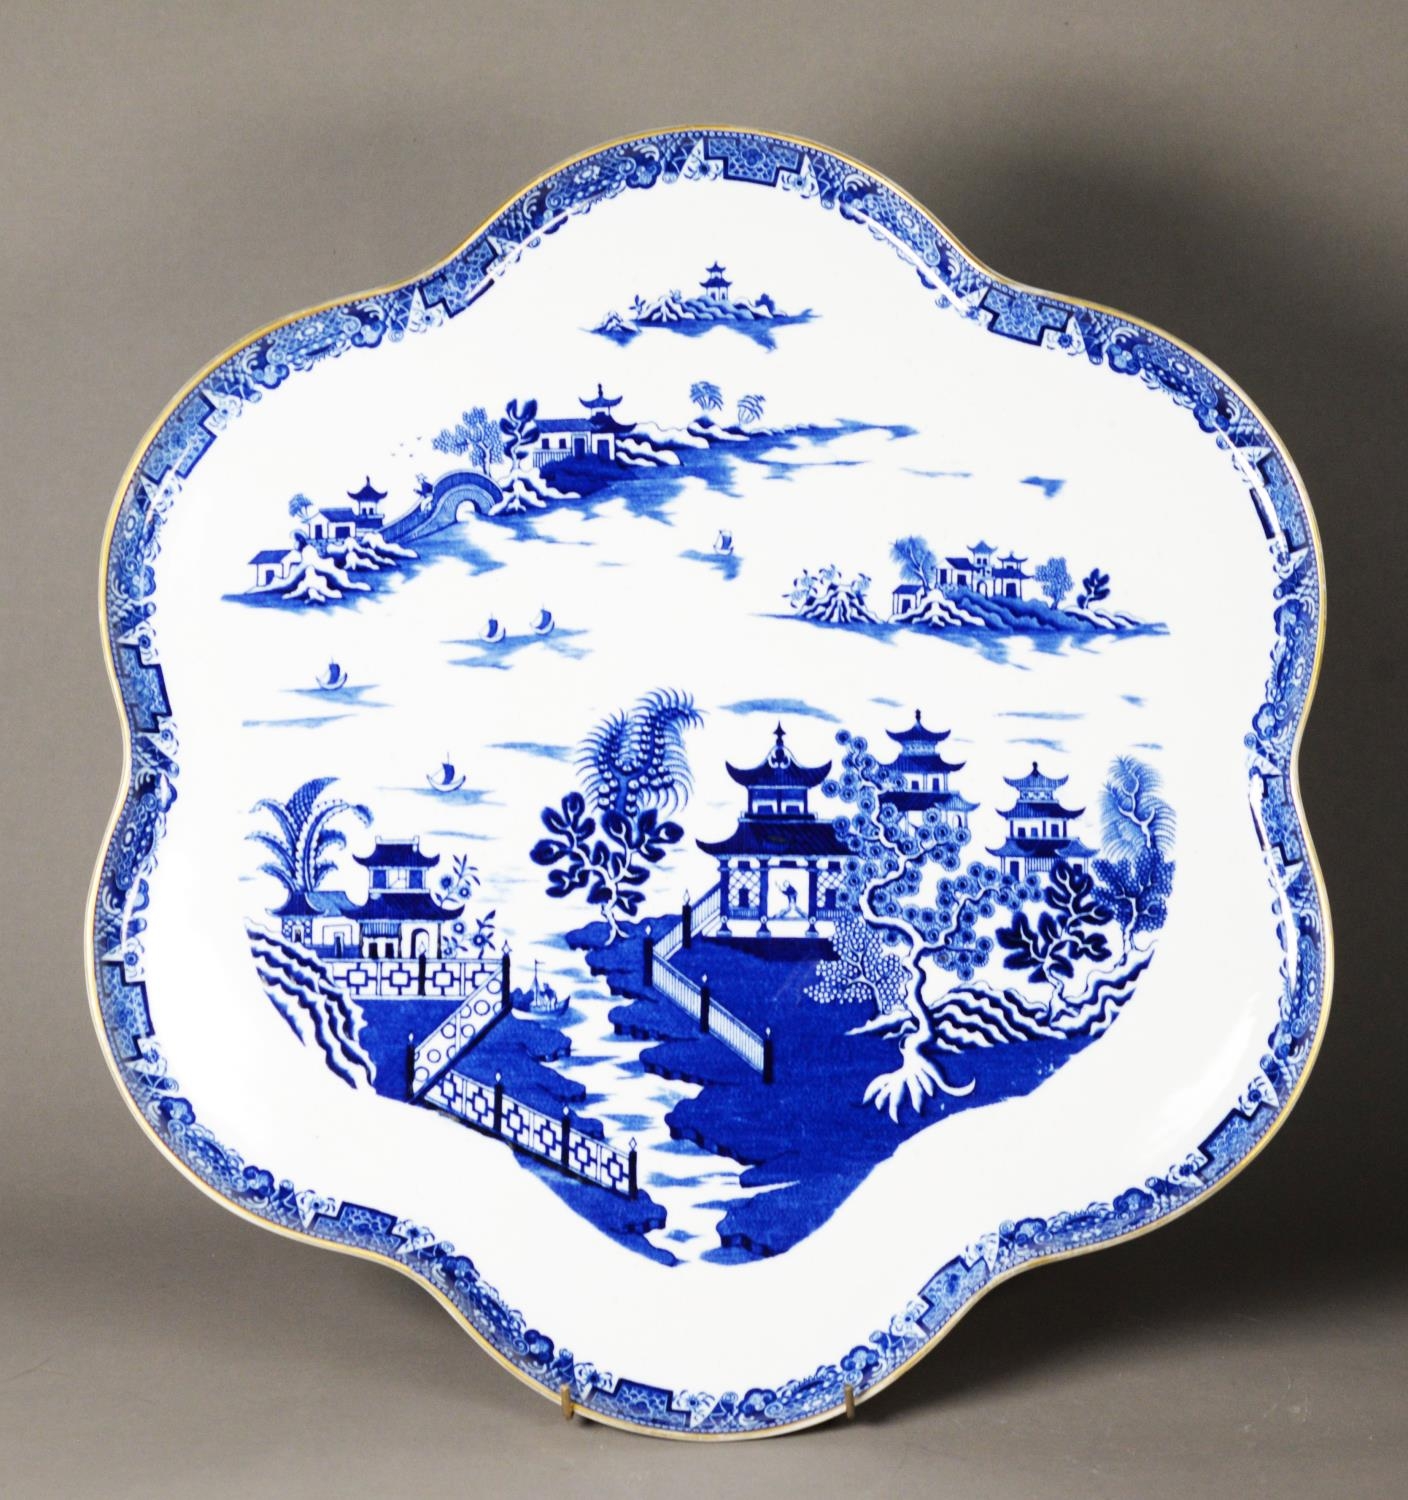 LATE VICTORIAN ROYAL WORCESTER PORCELAIN OCTAFOIL TRAY transfer printed in underglaze blue with